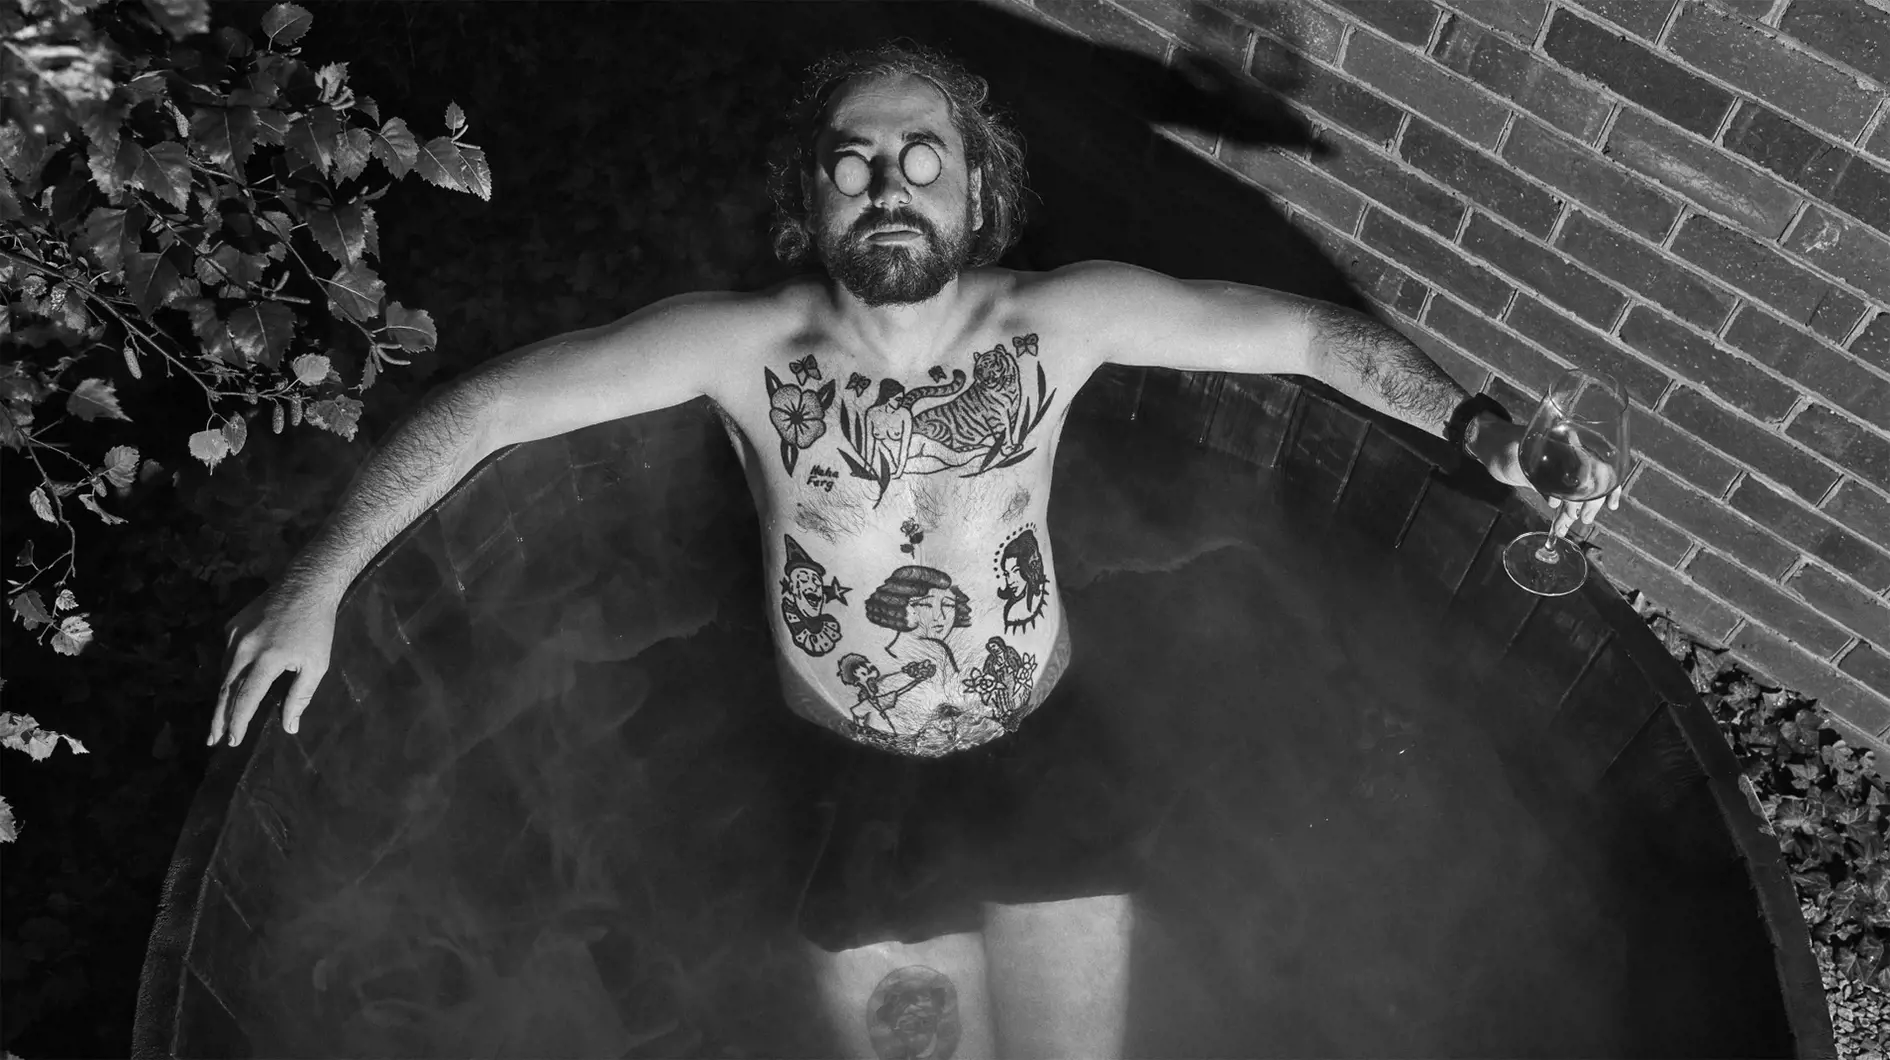 Tattooed man relaxing in wooden bath tub with a glass of wine and cucumbers over his eyes.